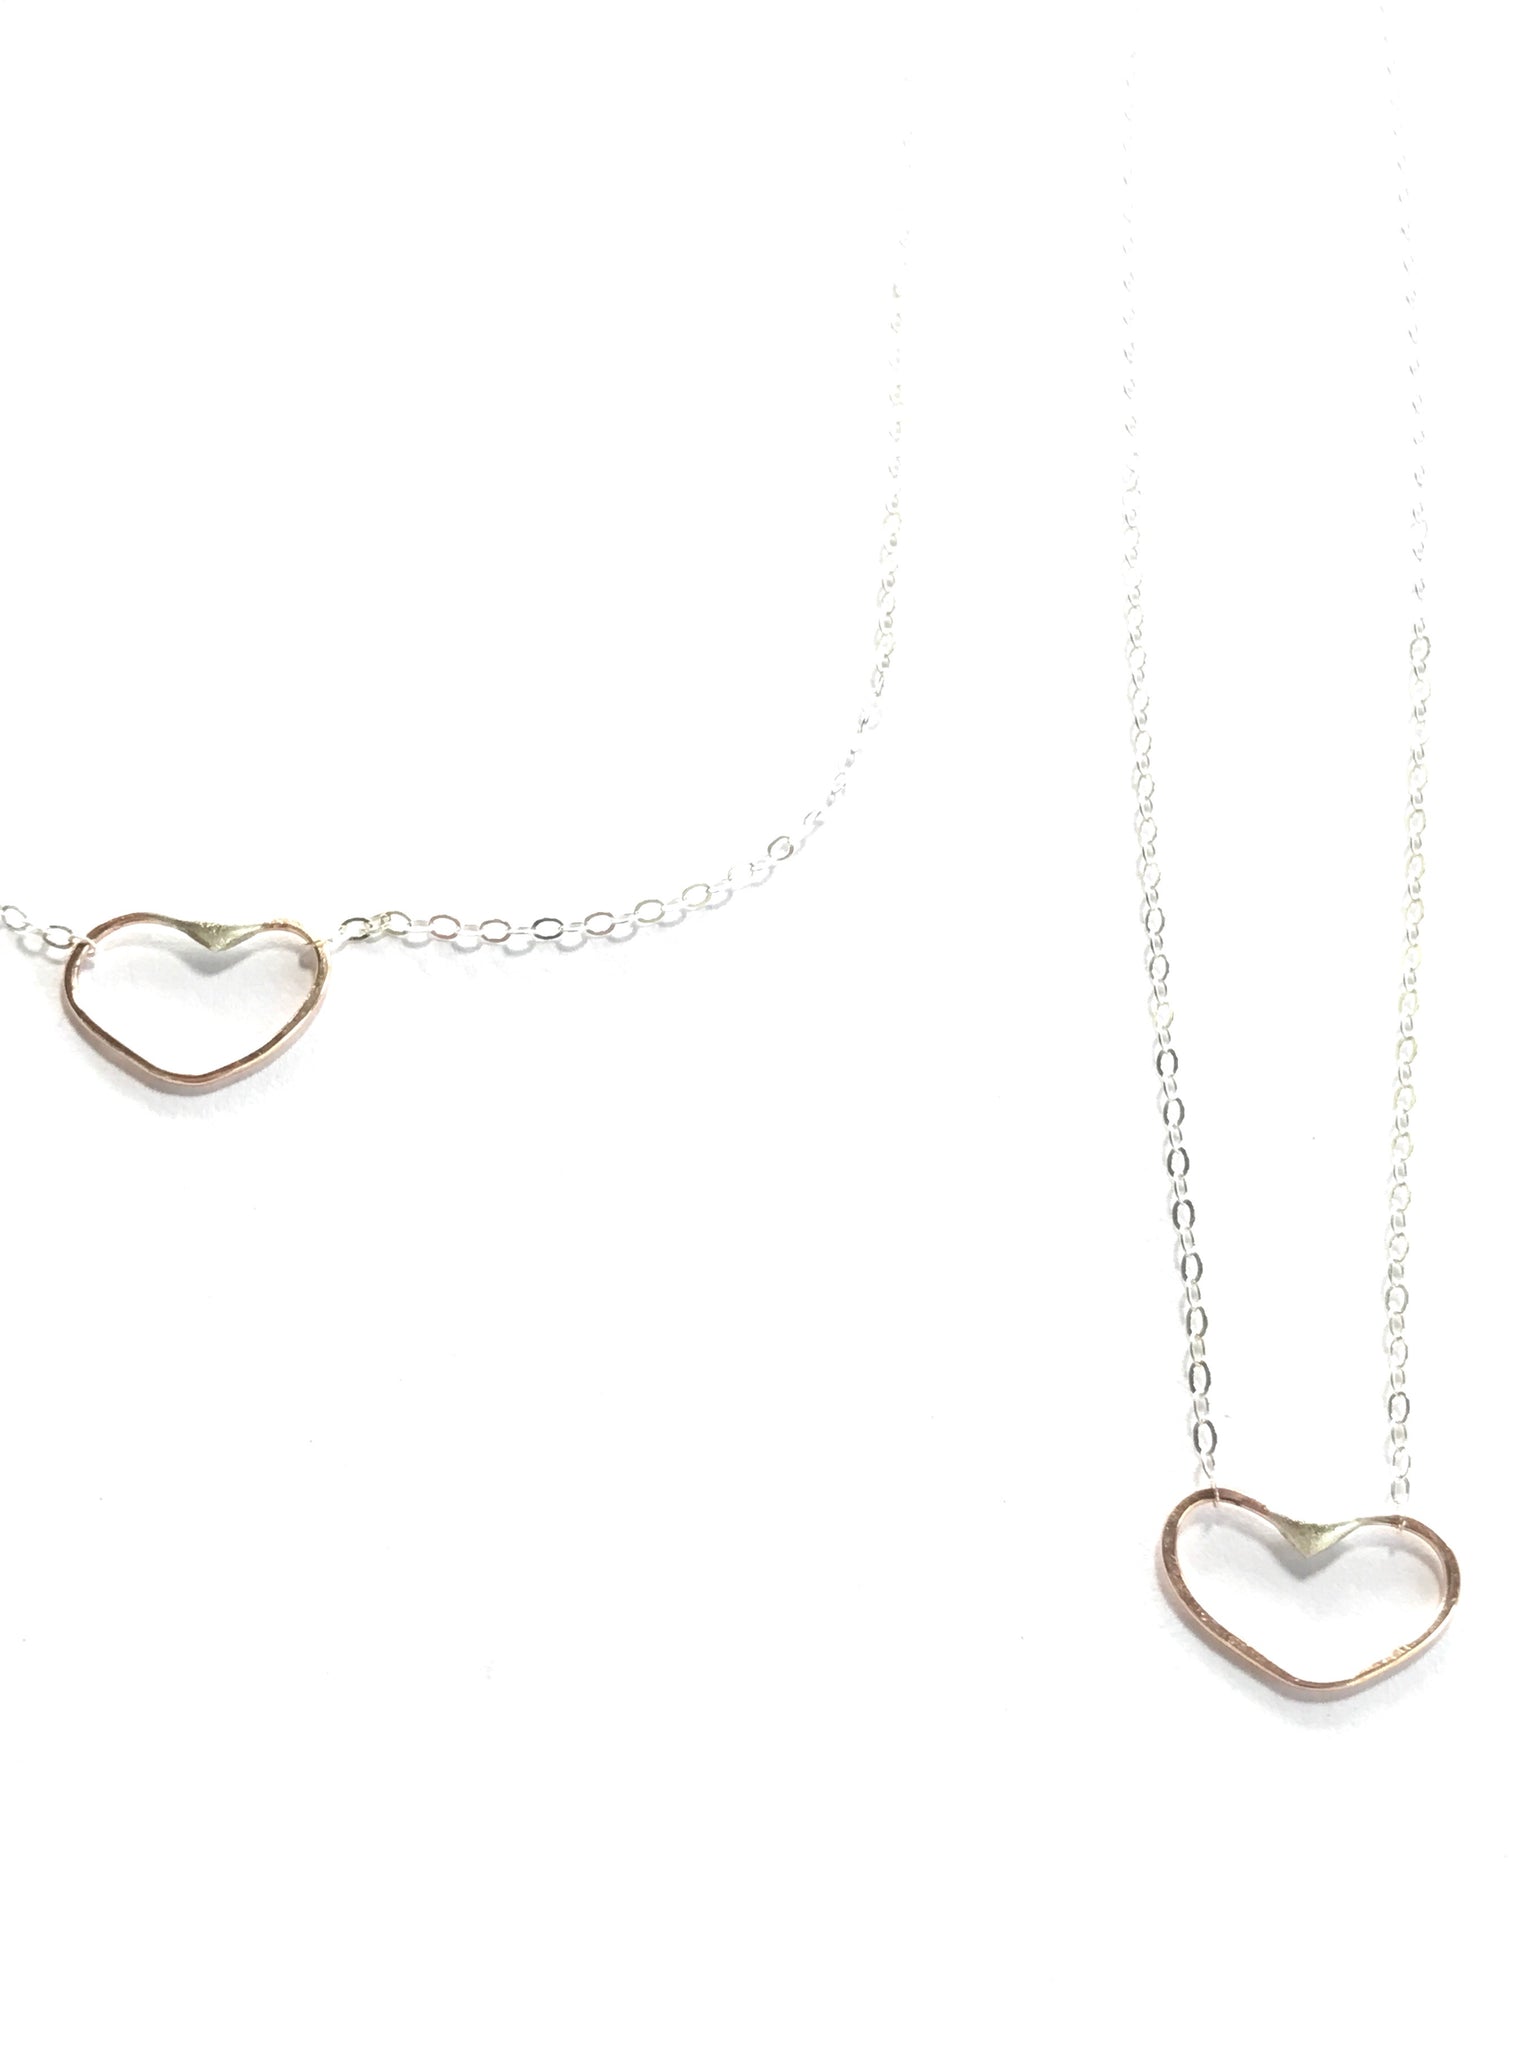 Mended heart - necklace